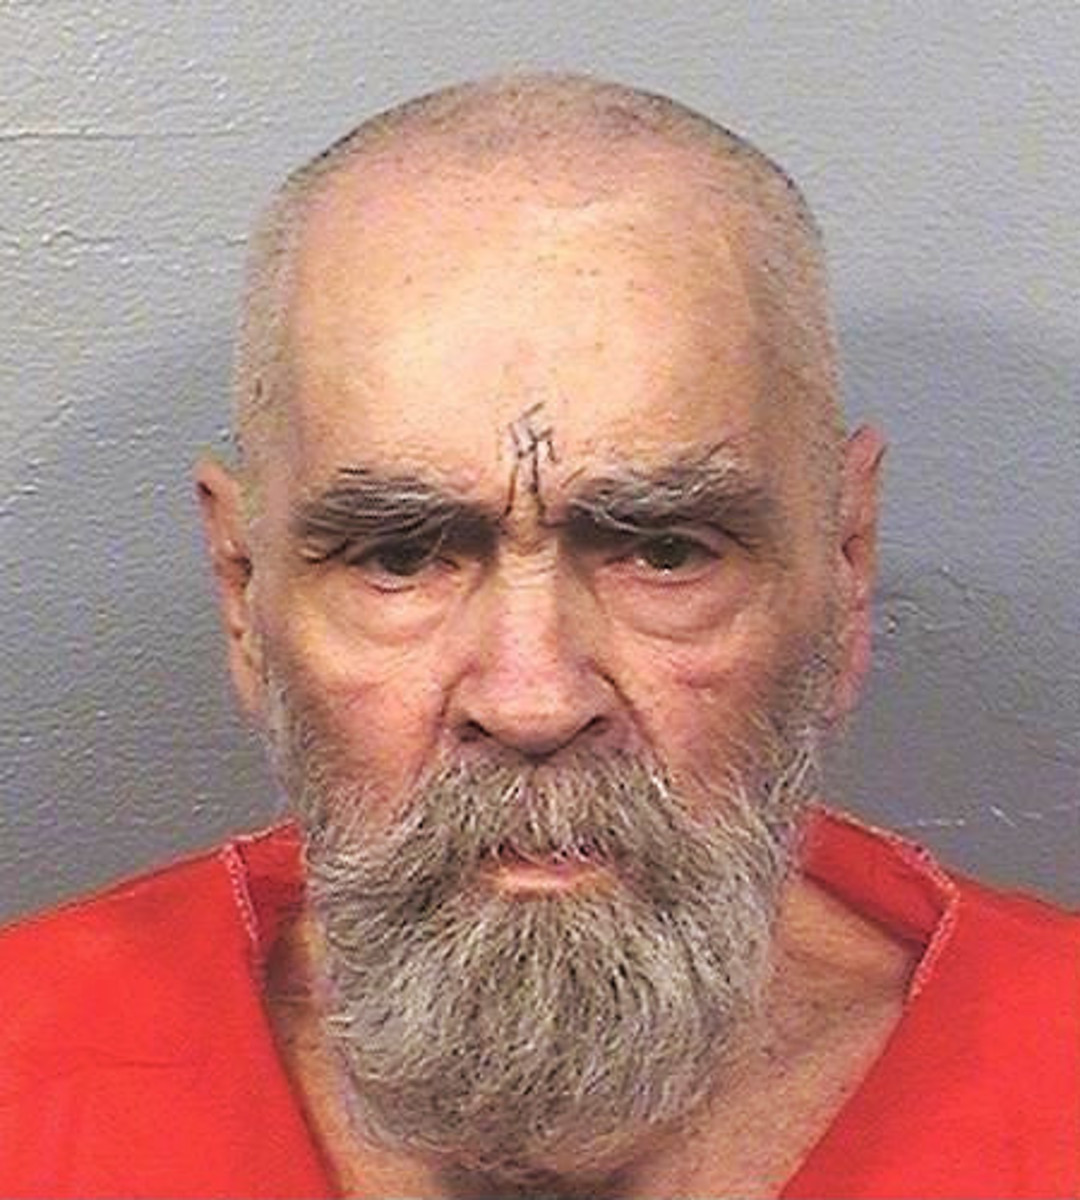 Charles Manson who led a murderous California cult attracted many female admirers. One of them, Afton Elaine Burton, 26, wrote to him, visited him, and falsely claimed she was married to 80-year-old Manson in 2014.